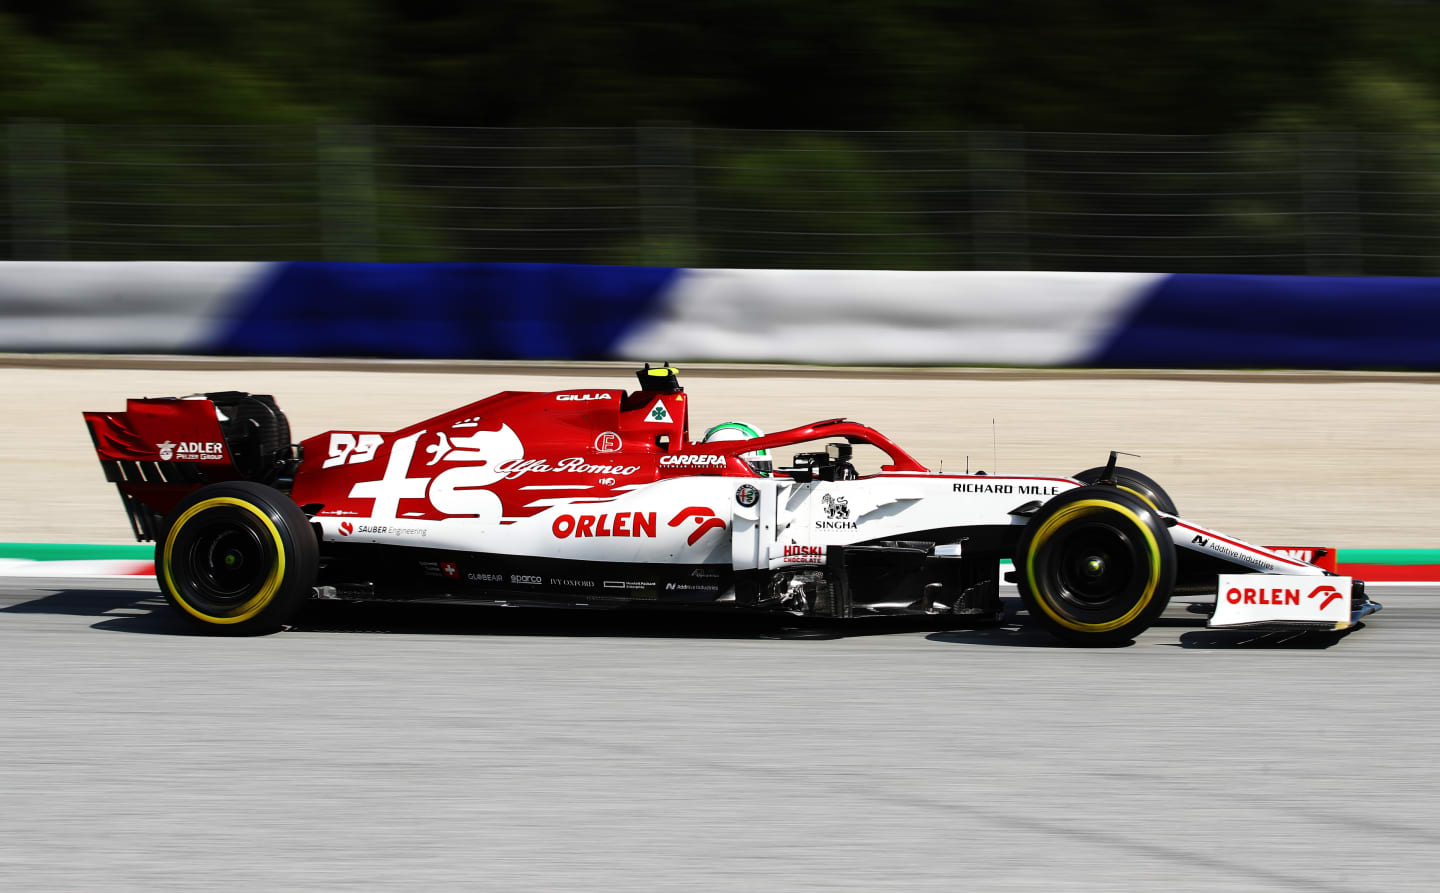 SPIELBERG, AUSTRIA - JULY 10: Antonio Giovinazzi of Italy driving the (99) Alfa Romeo Racing C39 Ferrari on track during practice for the F1 Grand Prix of Styria at Red Bull Ring on July 10, 2020 in Spielberg, Austria. (Photo by Bryn Lennon/Getty Images)